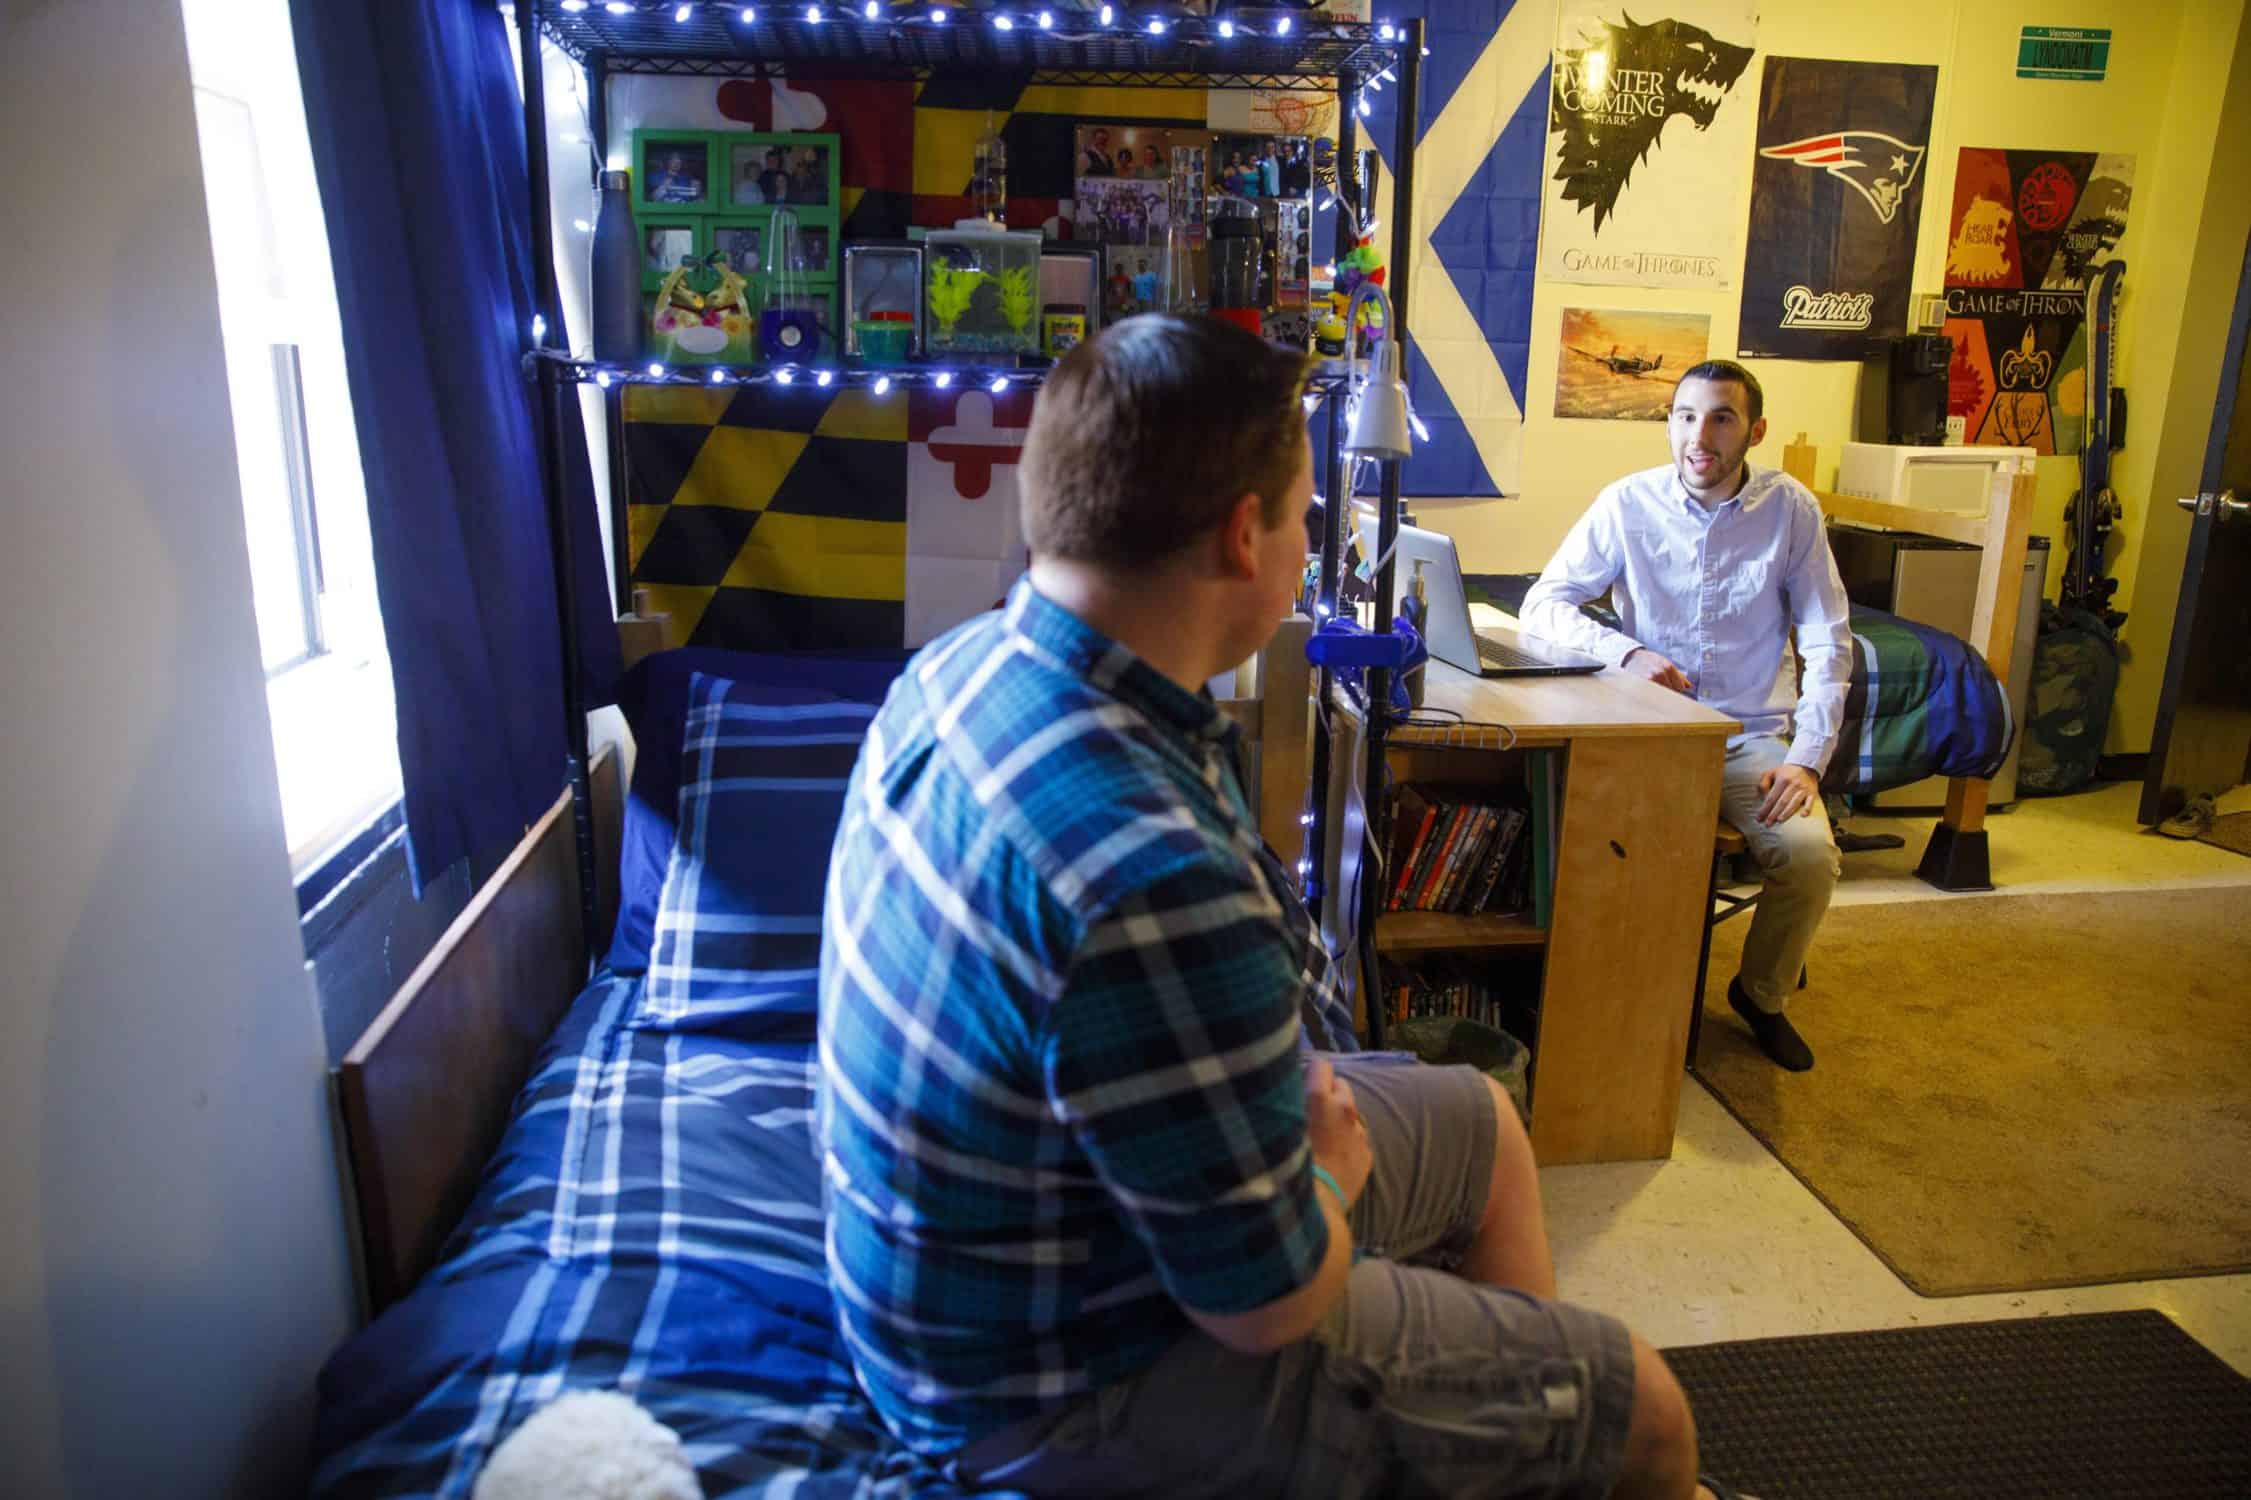 Two students in a residence hall room